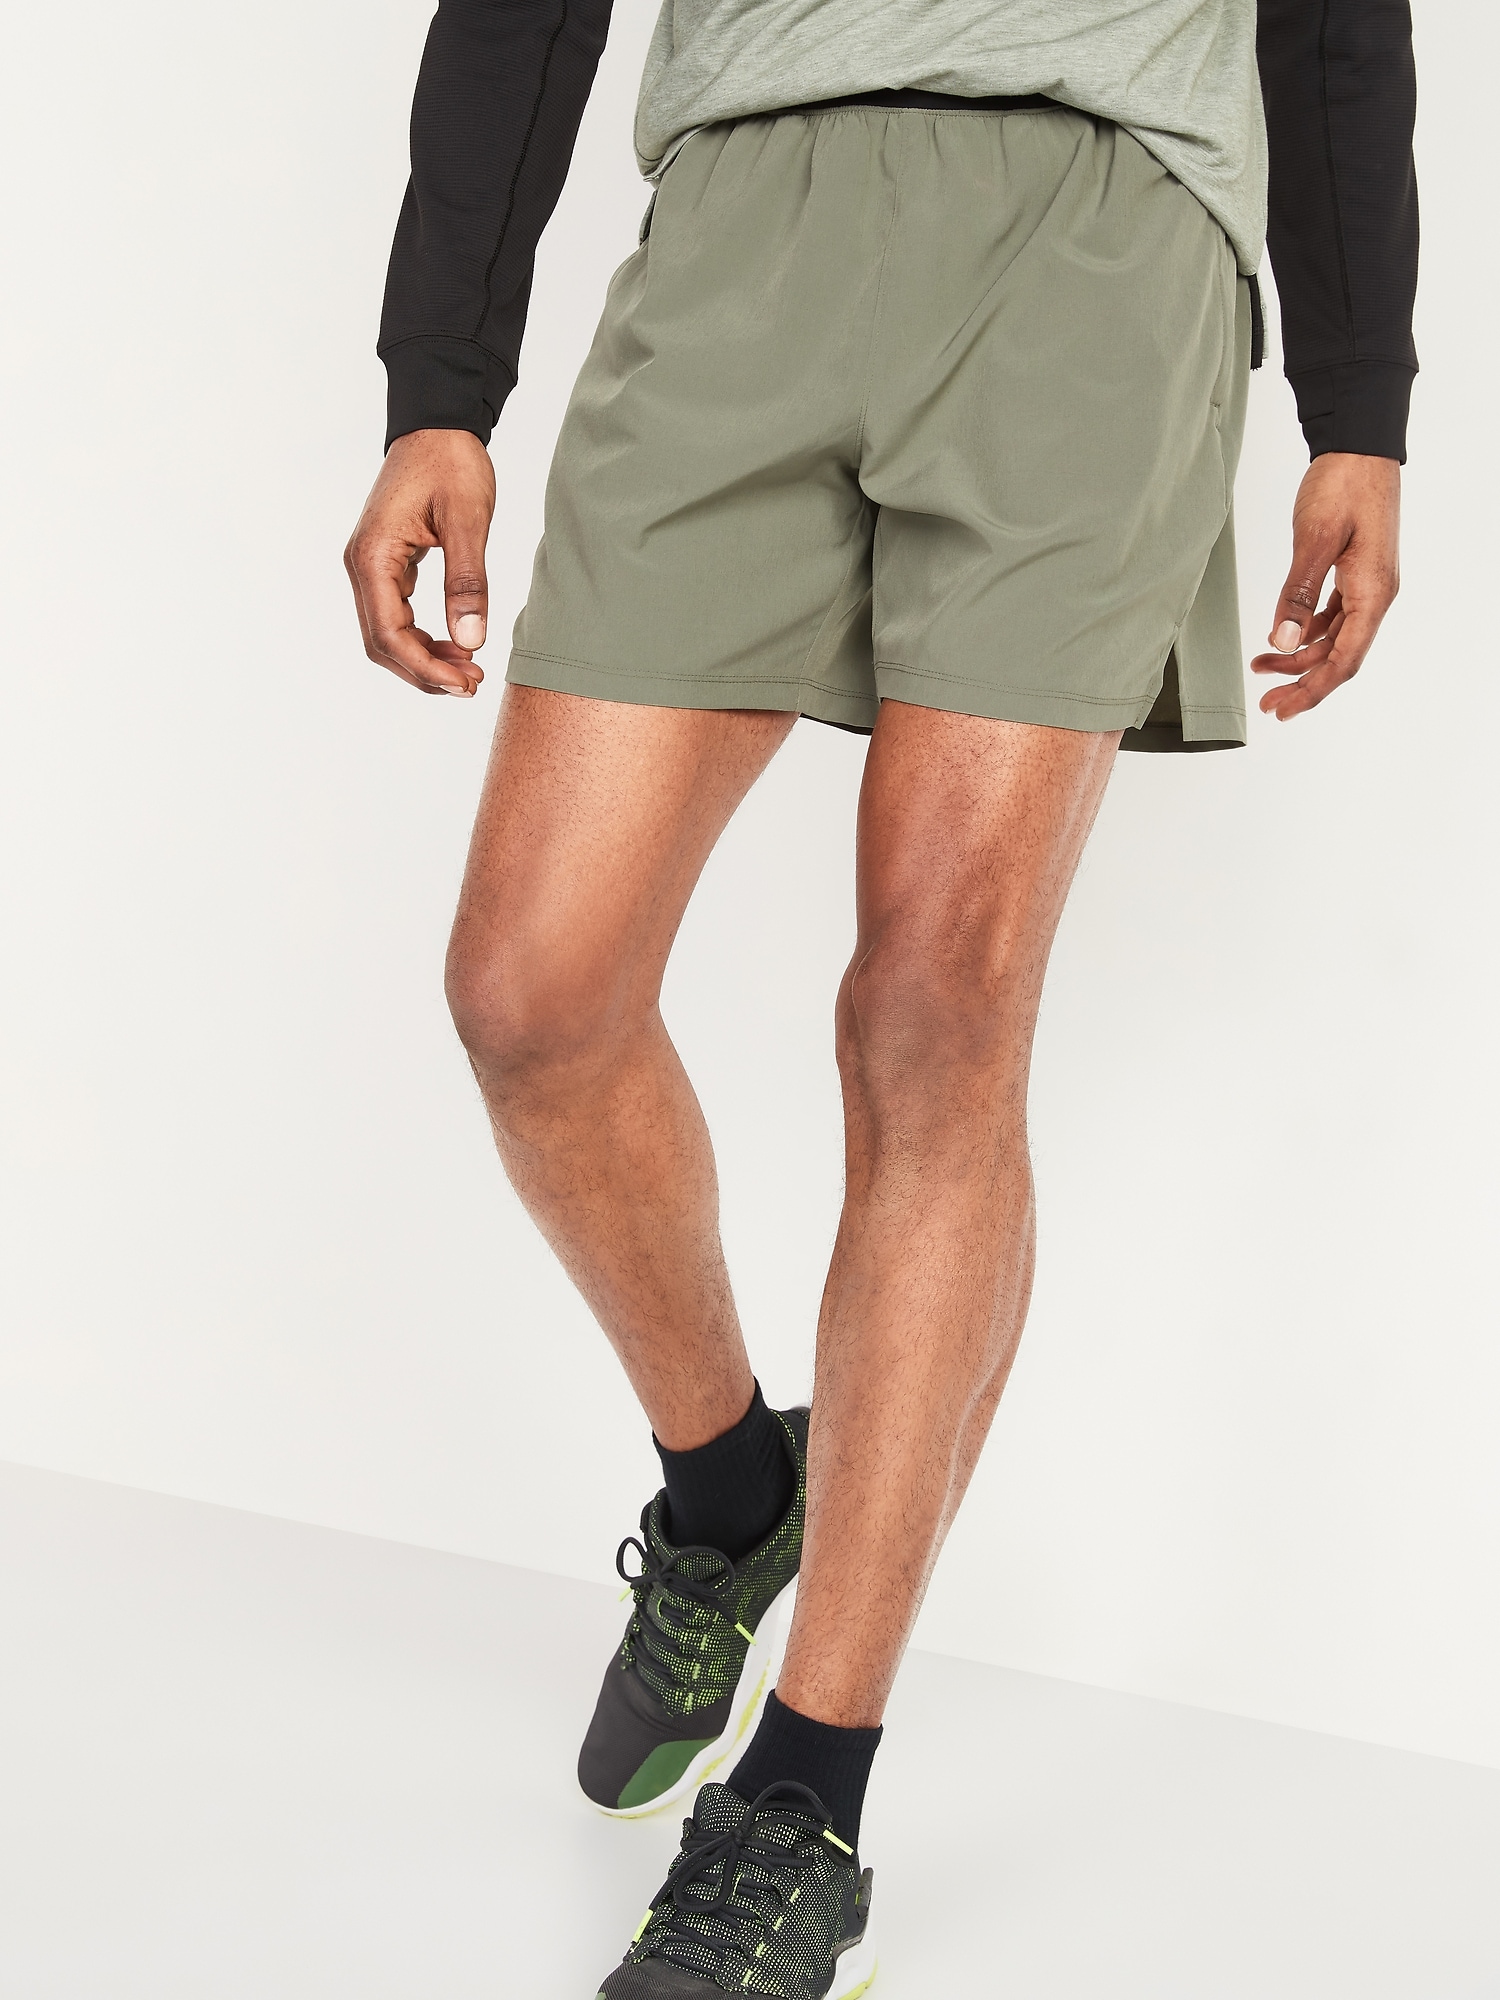 Mens Workout Shorts with Pockets